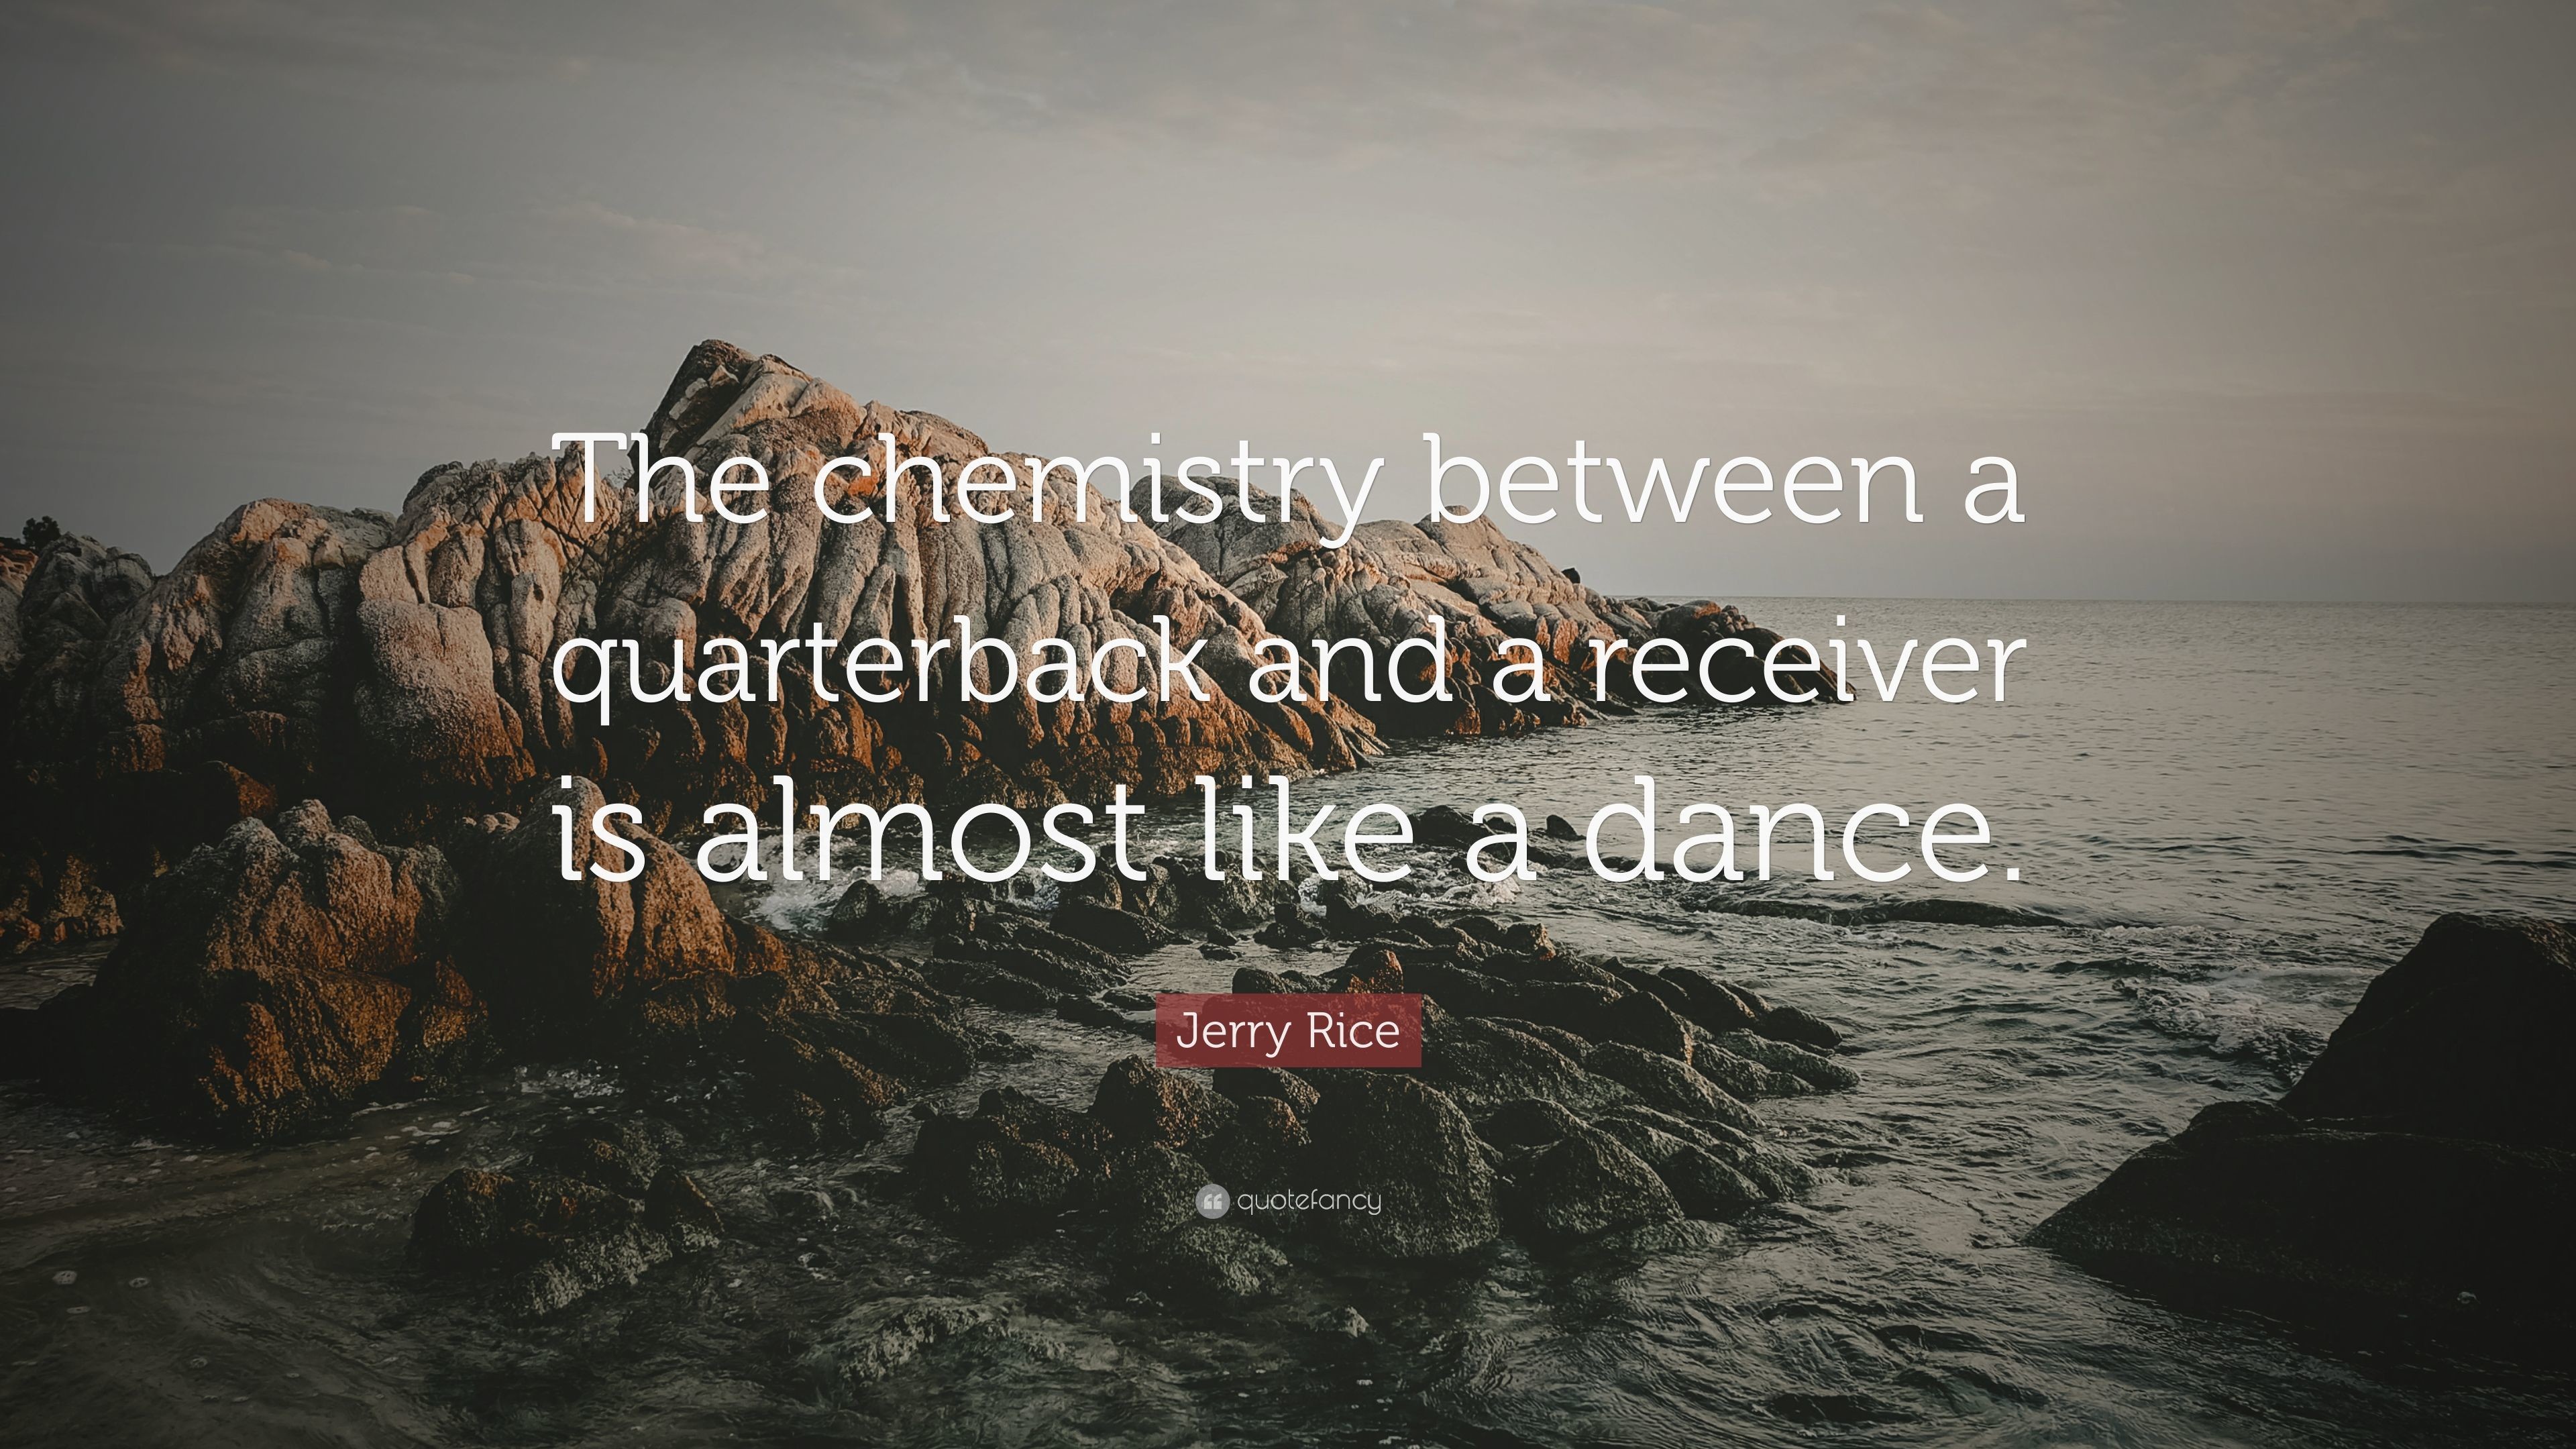 3840x2160 Jerry Rice Quote: “The chemistry between a quarterback and a receiver is  almost like